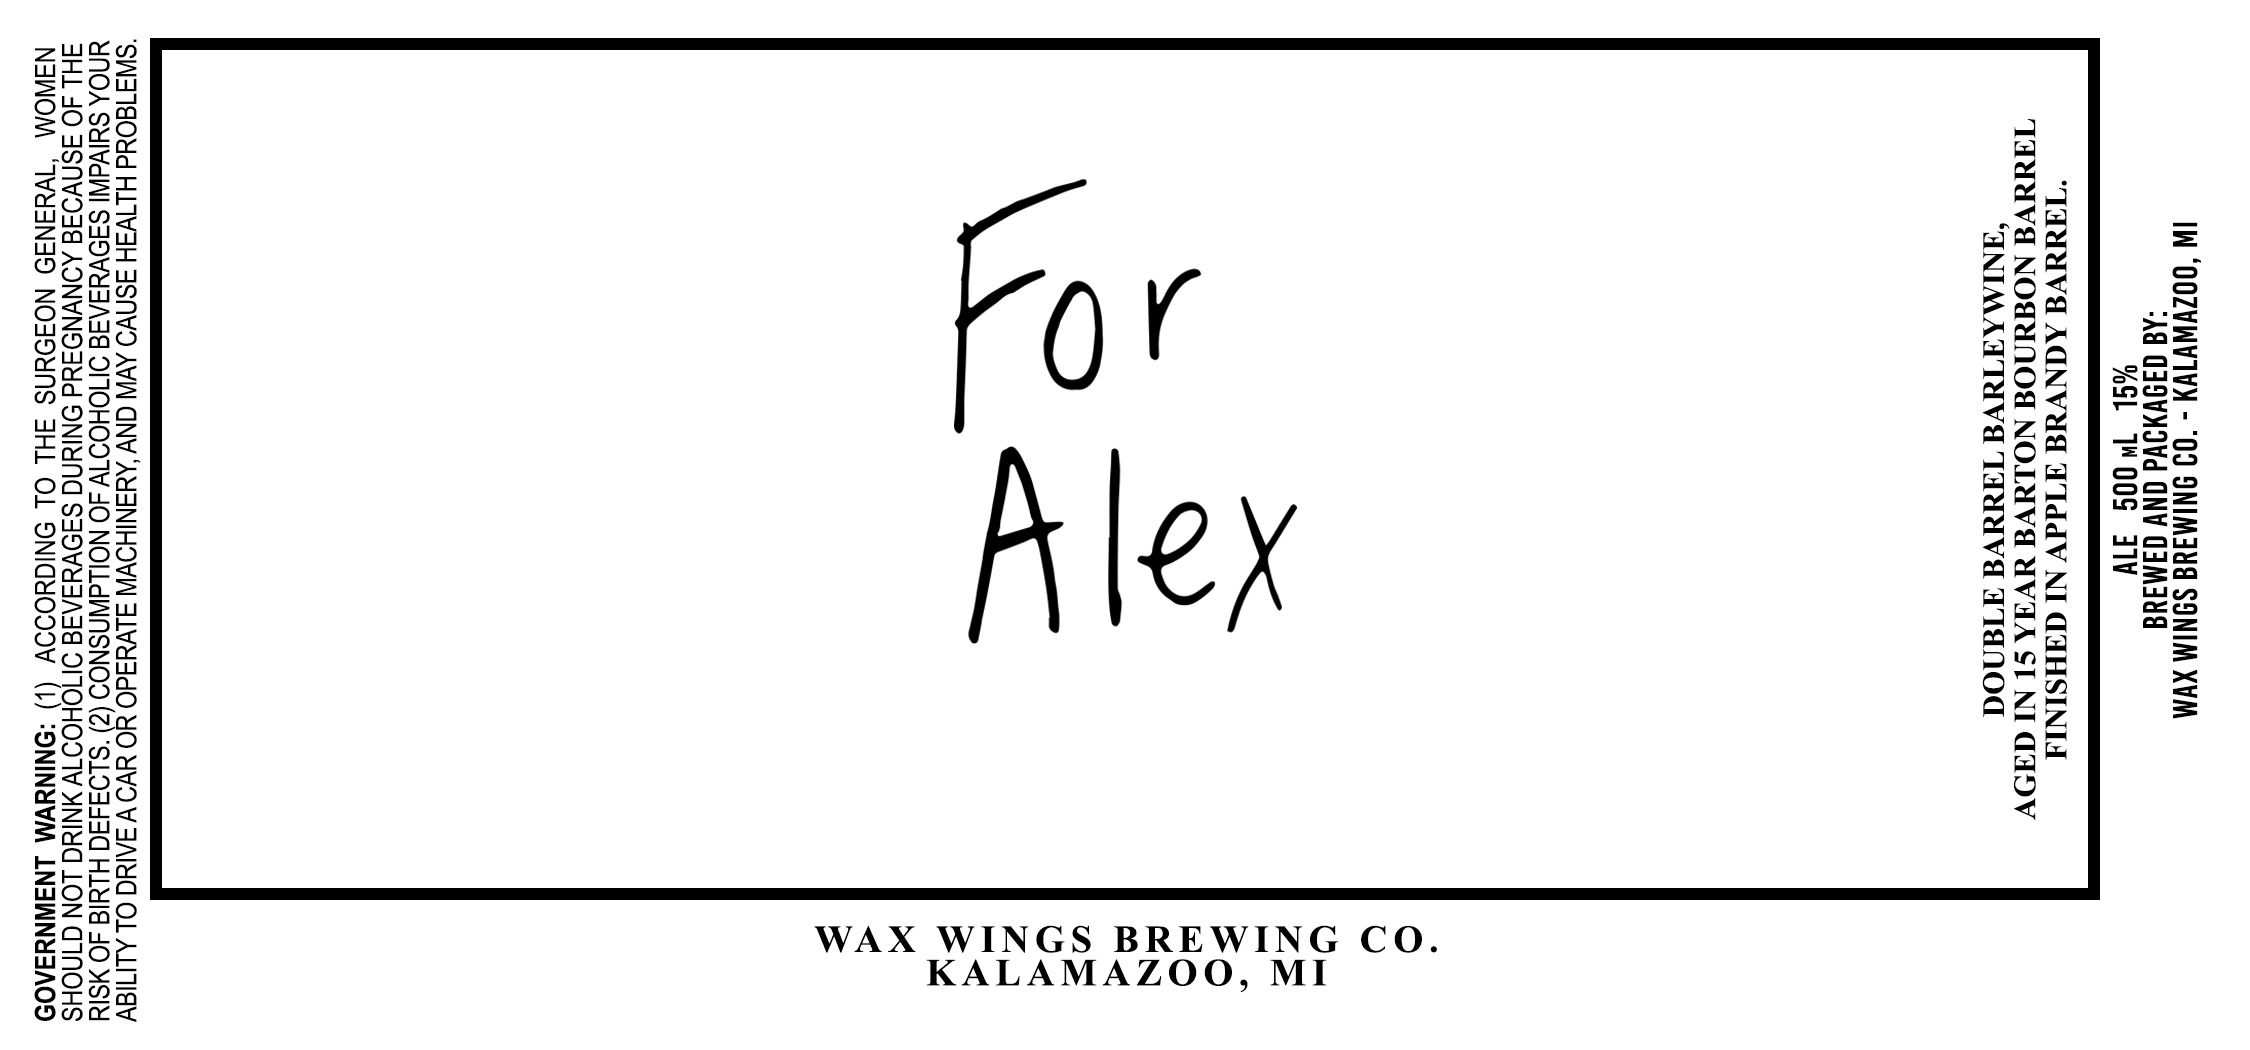 Label Artwork for Wax Wing's For Alex Barleywine